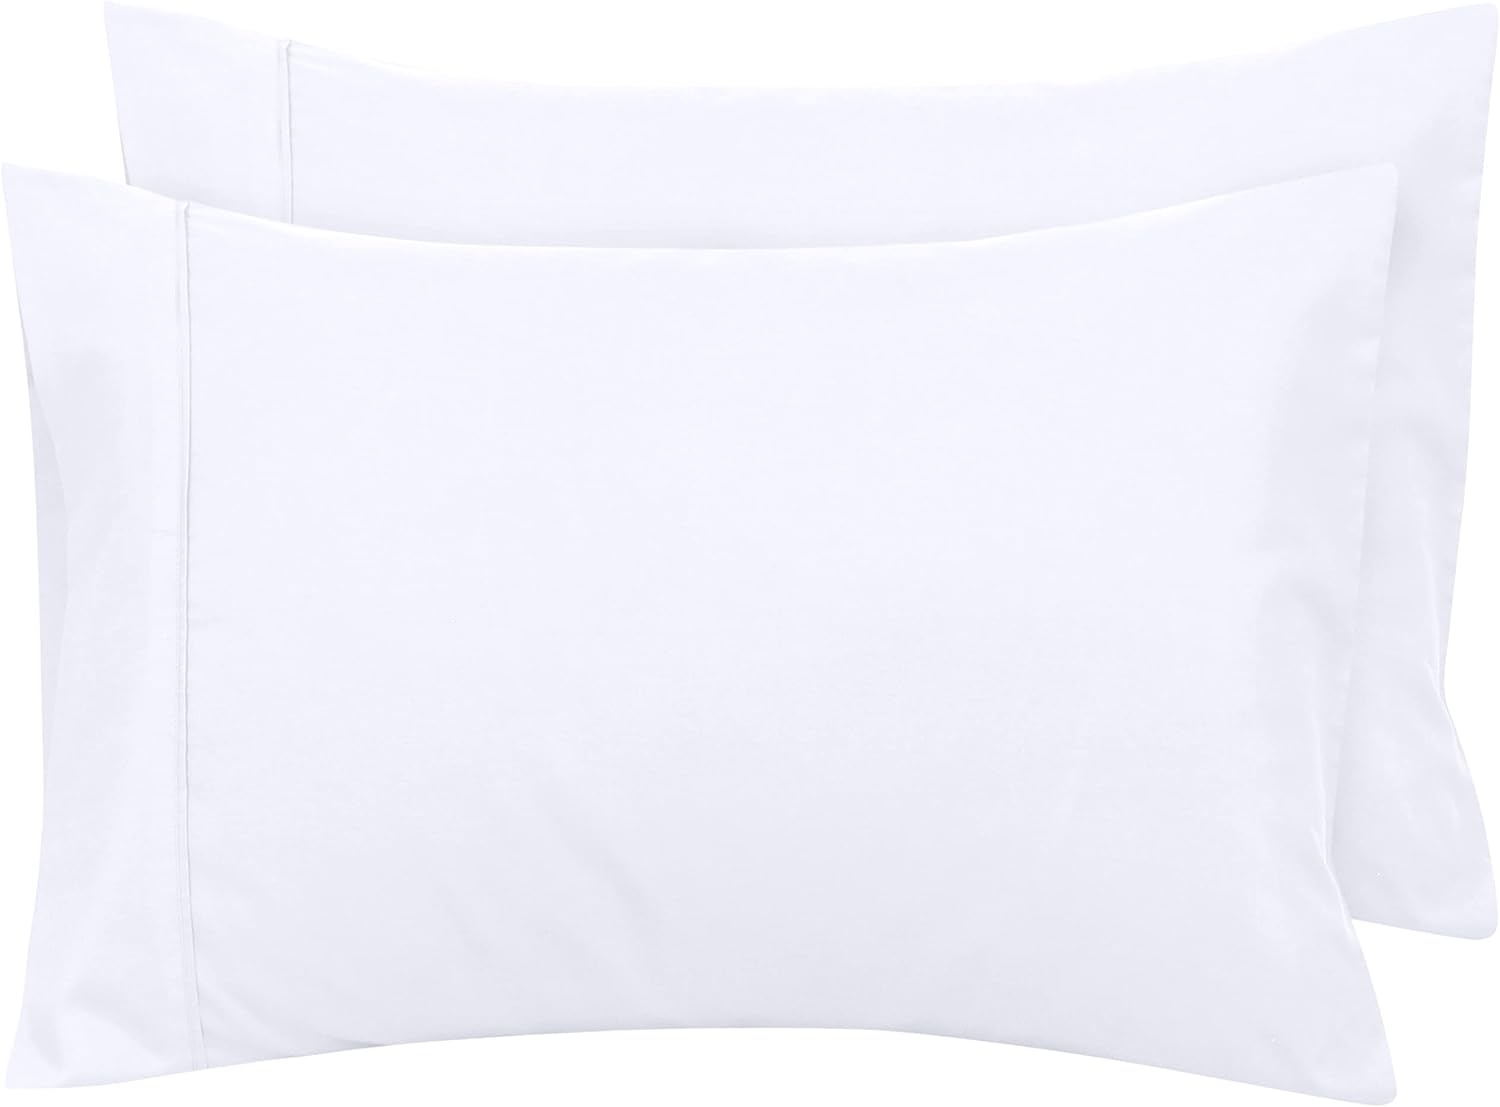 Royale Linens King Pillowcase Set of 2 - Bed Pillow Cover - 20" x 40" -White Pillowcases - 1800 Brushed Microfiber, Wrinkle & Fade Resistant - Soft & Cozy- King Size Pillow Case (King, White)